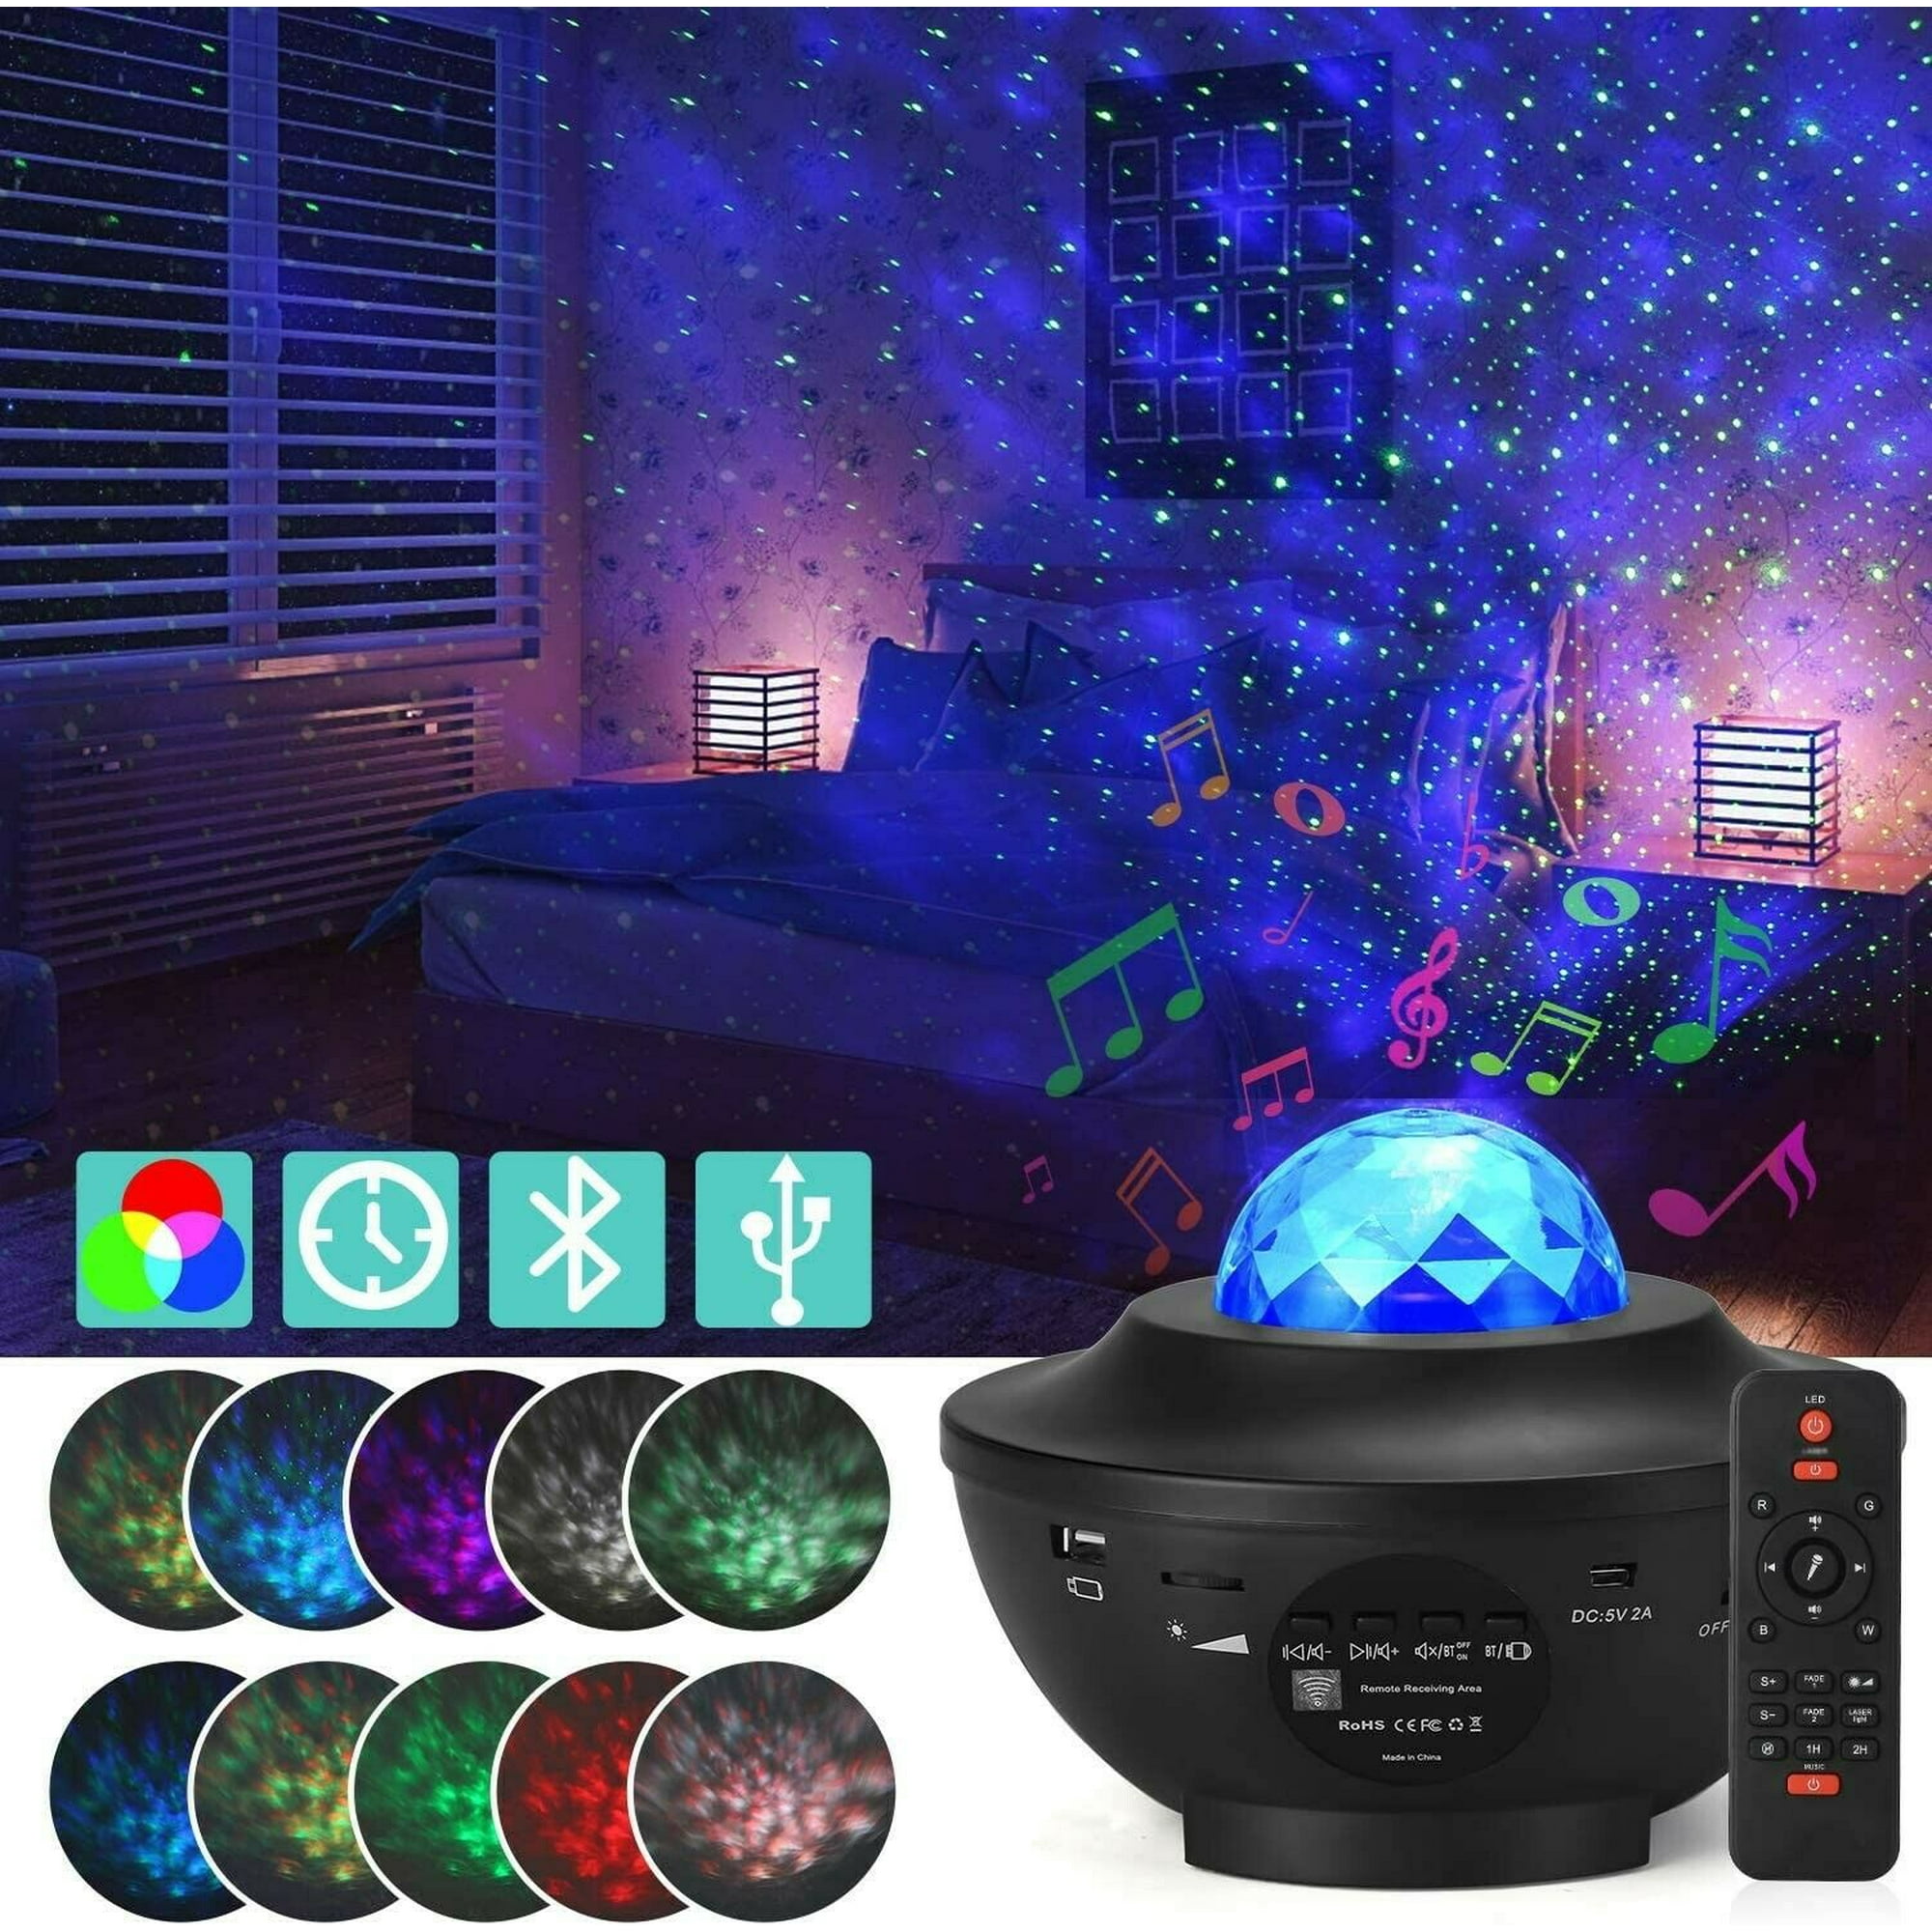 Galaxy Projector Star Light Projector for Bedroom | 3 in 1 Premium Starry  Night Light Projector Star Projector w/Galaxy Light LED | Adult Star Light  